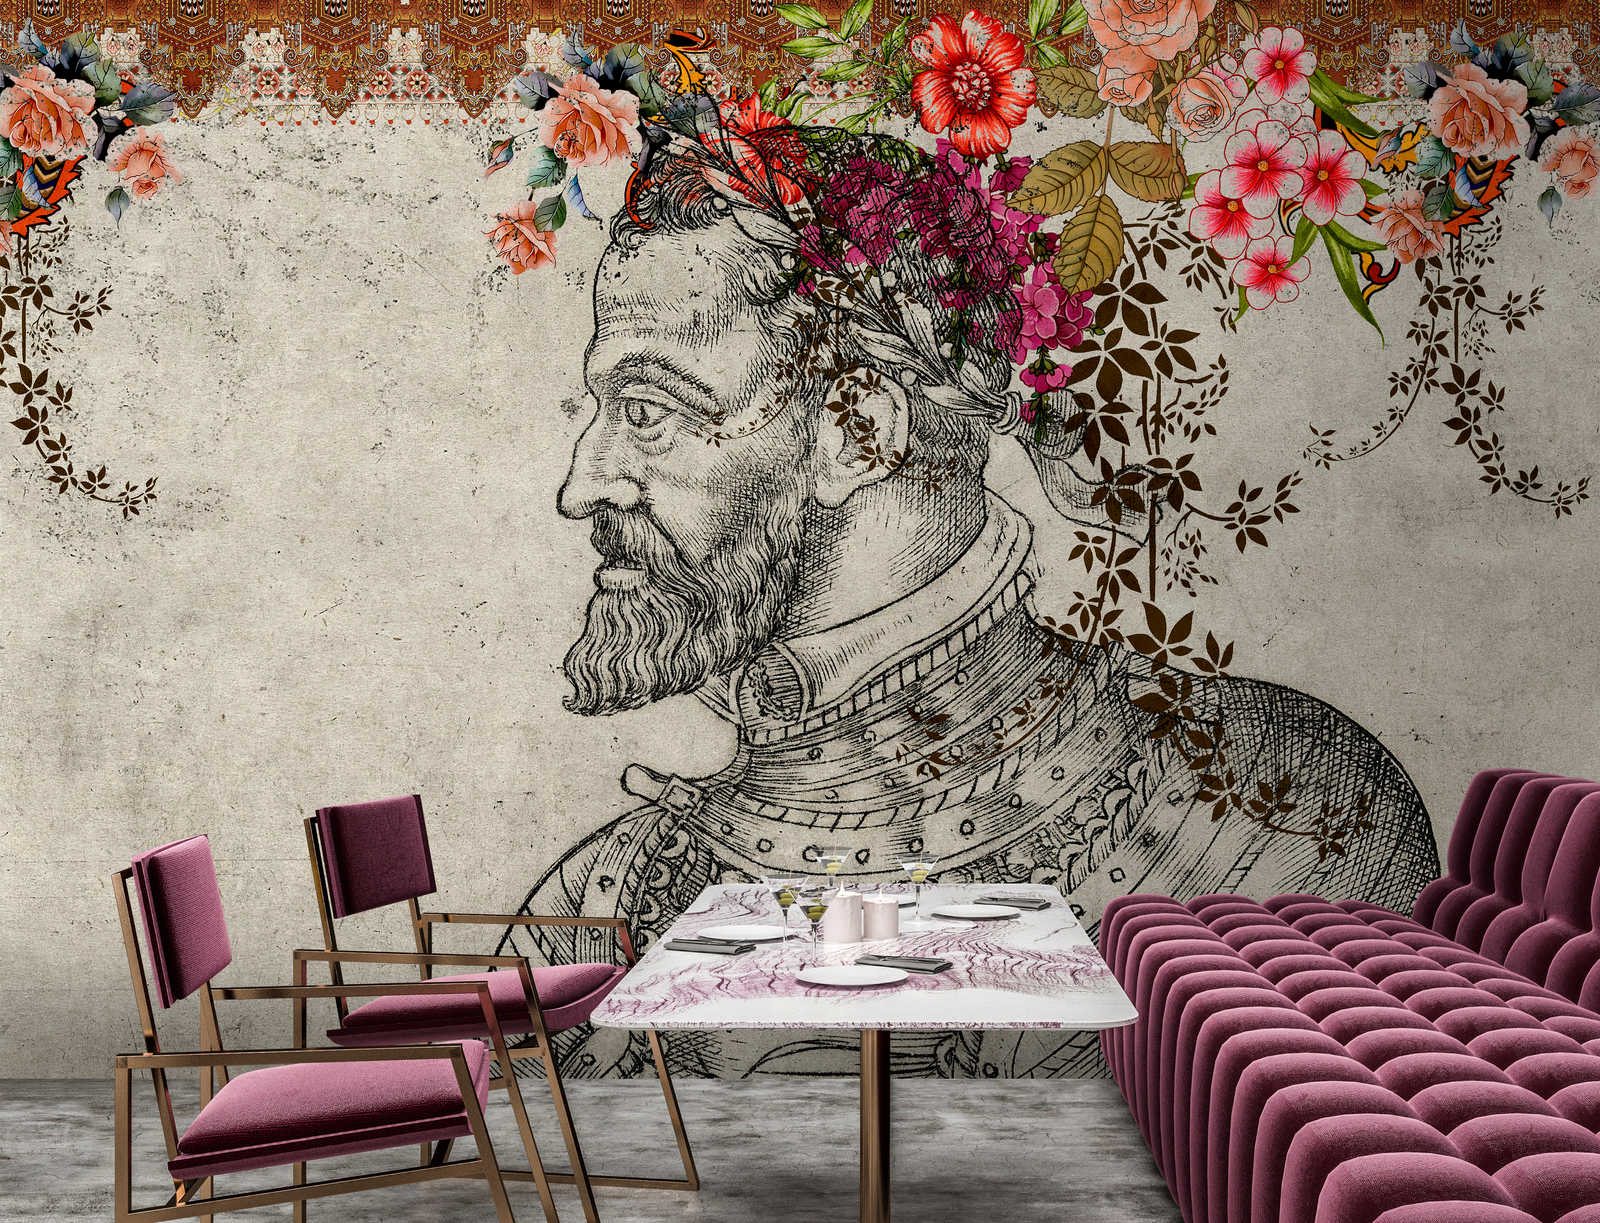             In the Gallery 2 - Photo wallpaper Historic Sketch & Flowers Design
        